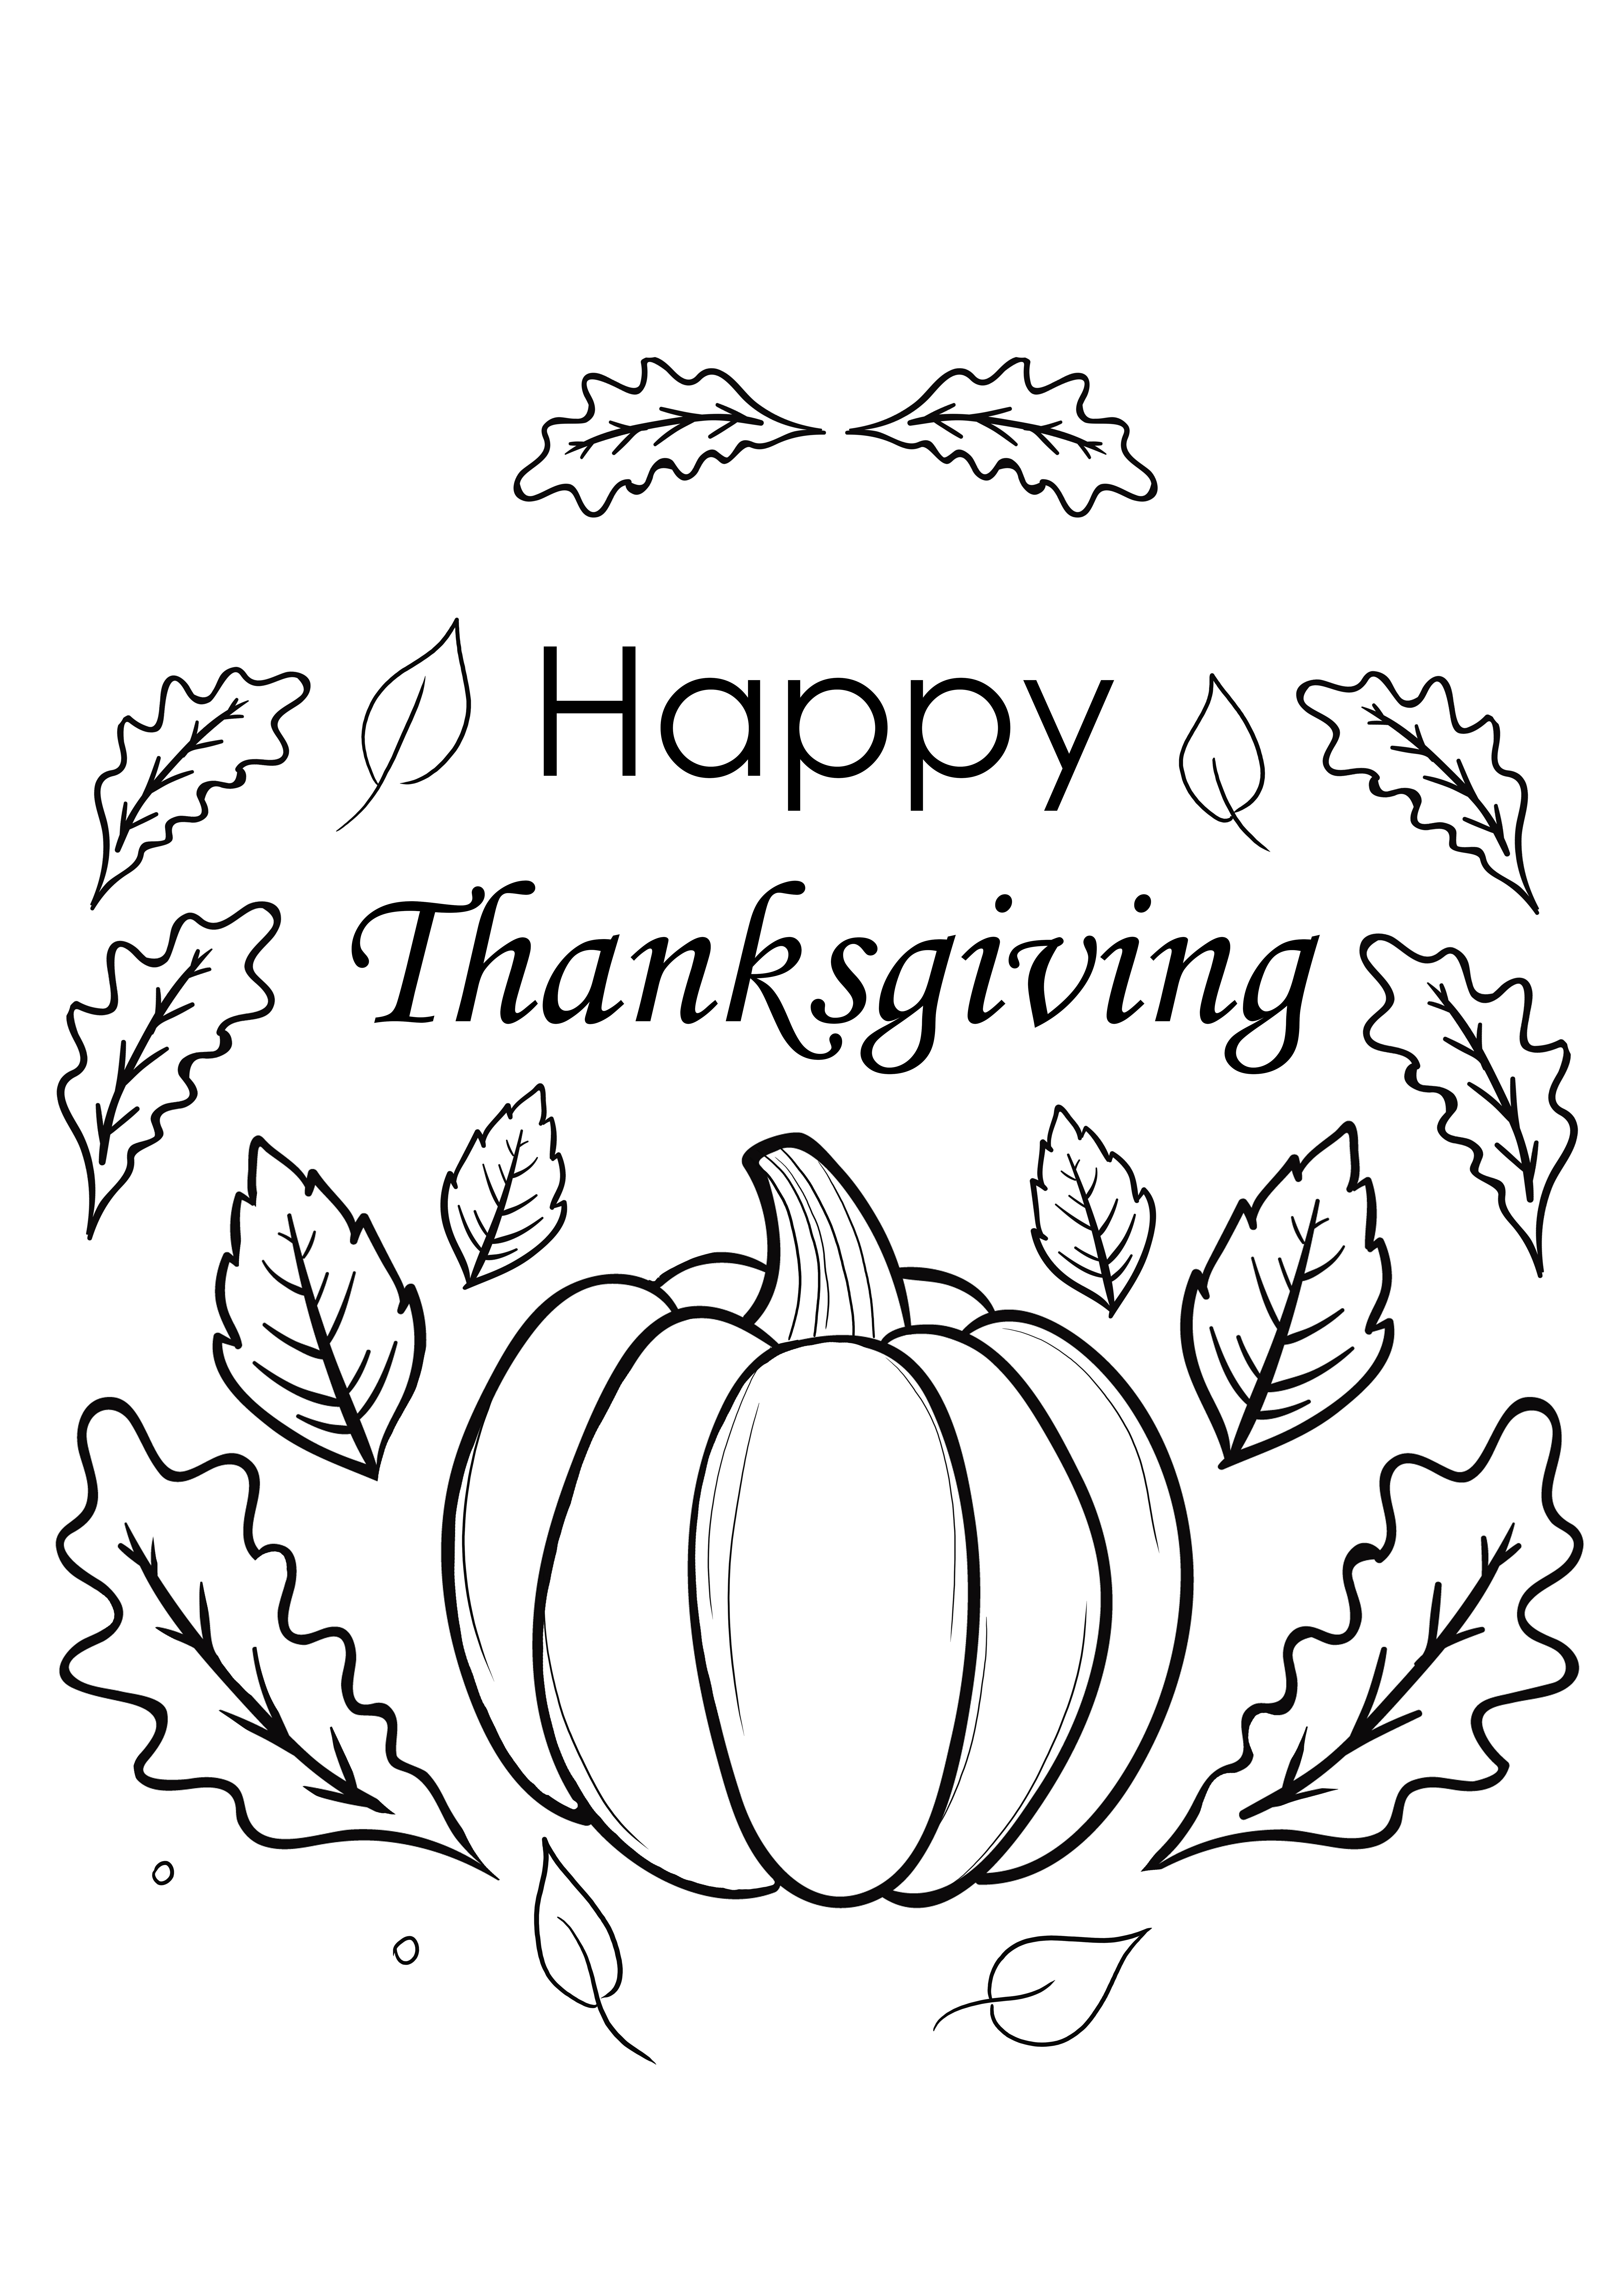 Happy Thanksgiving card to download for kids to color for free